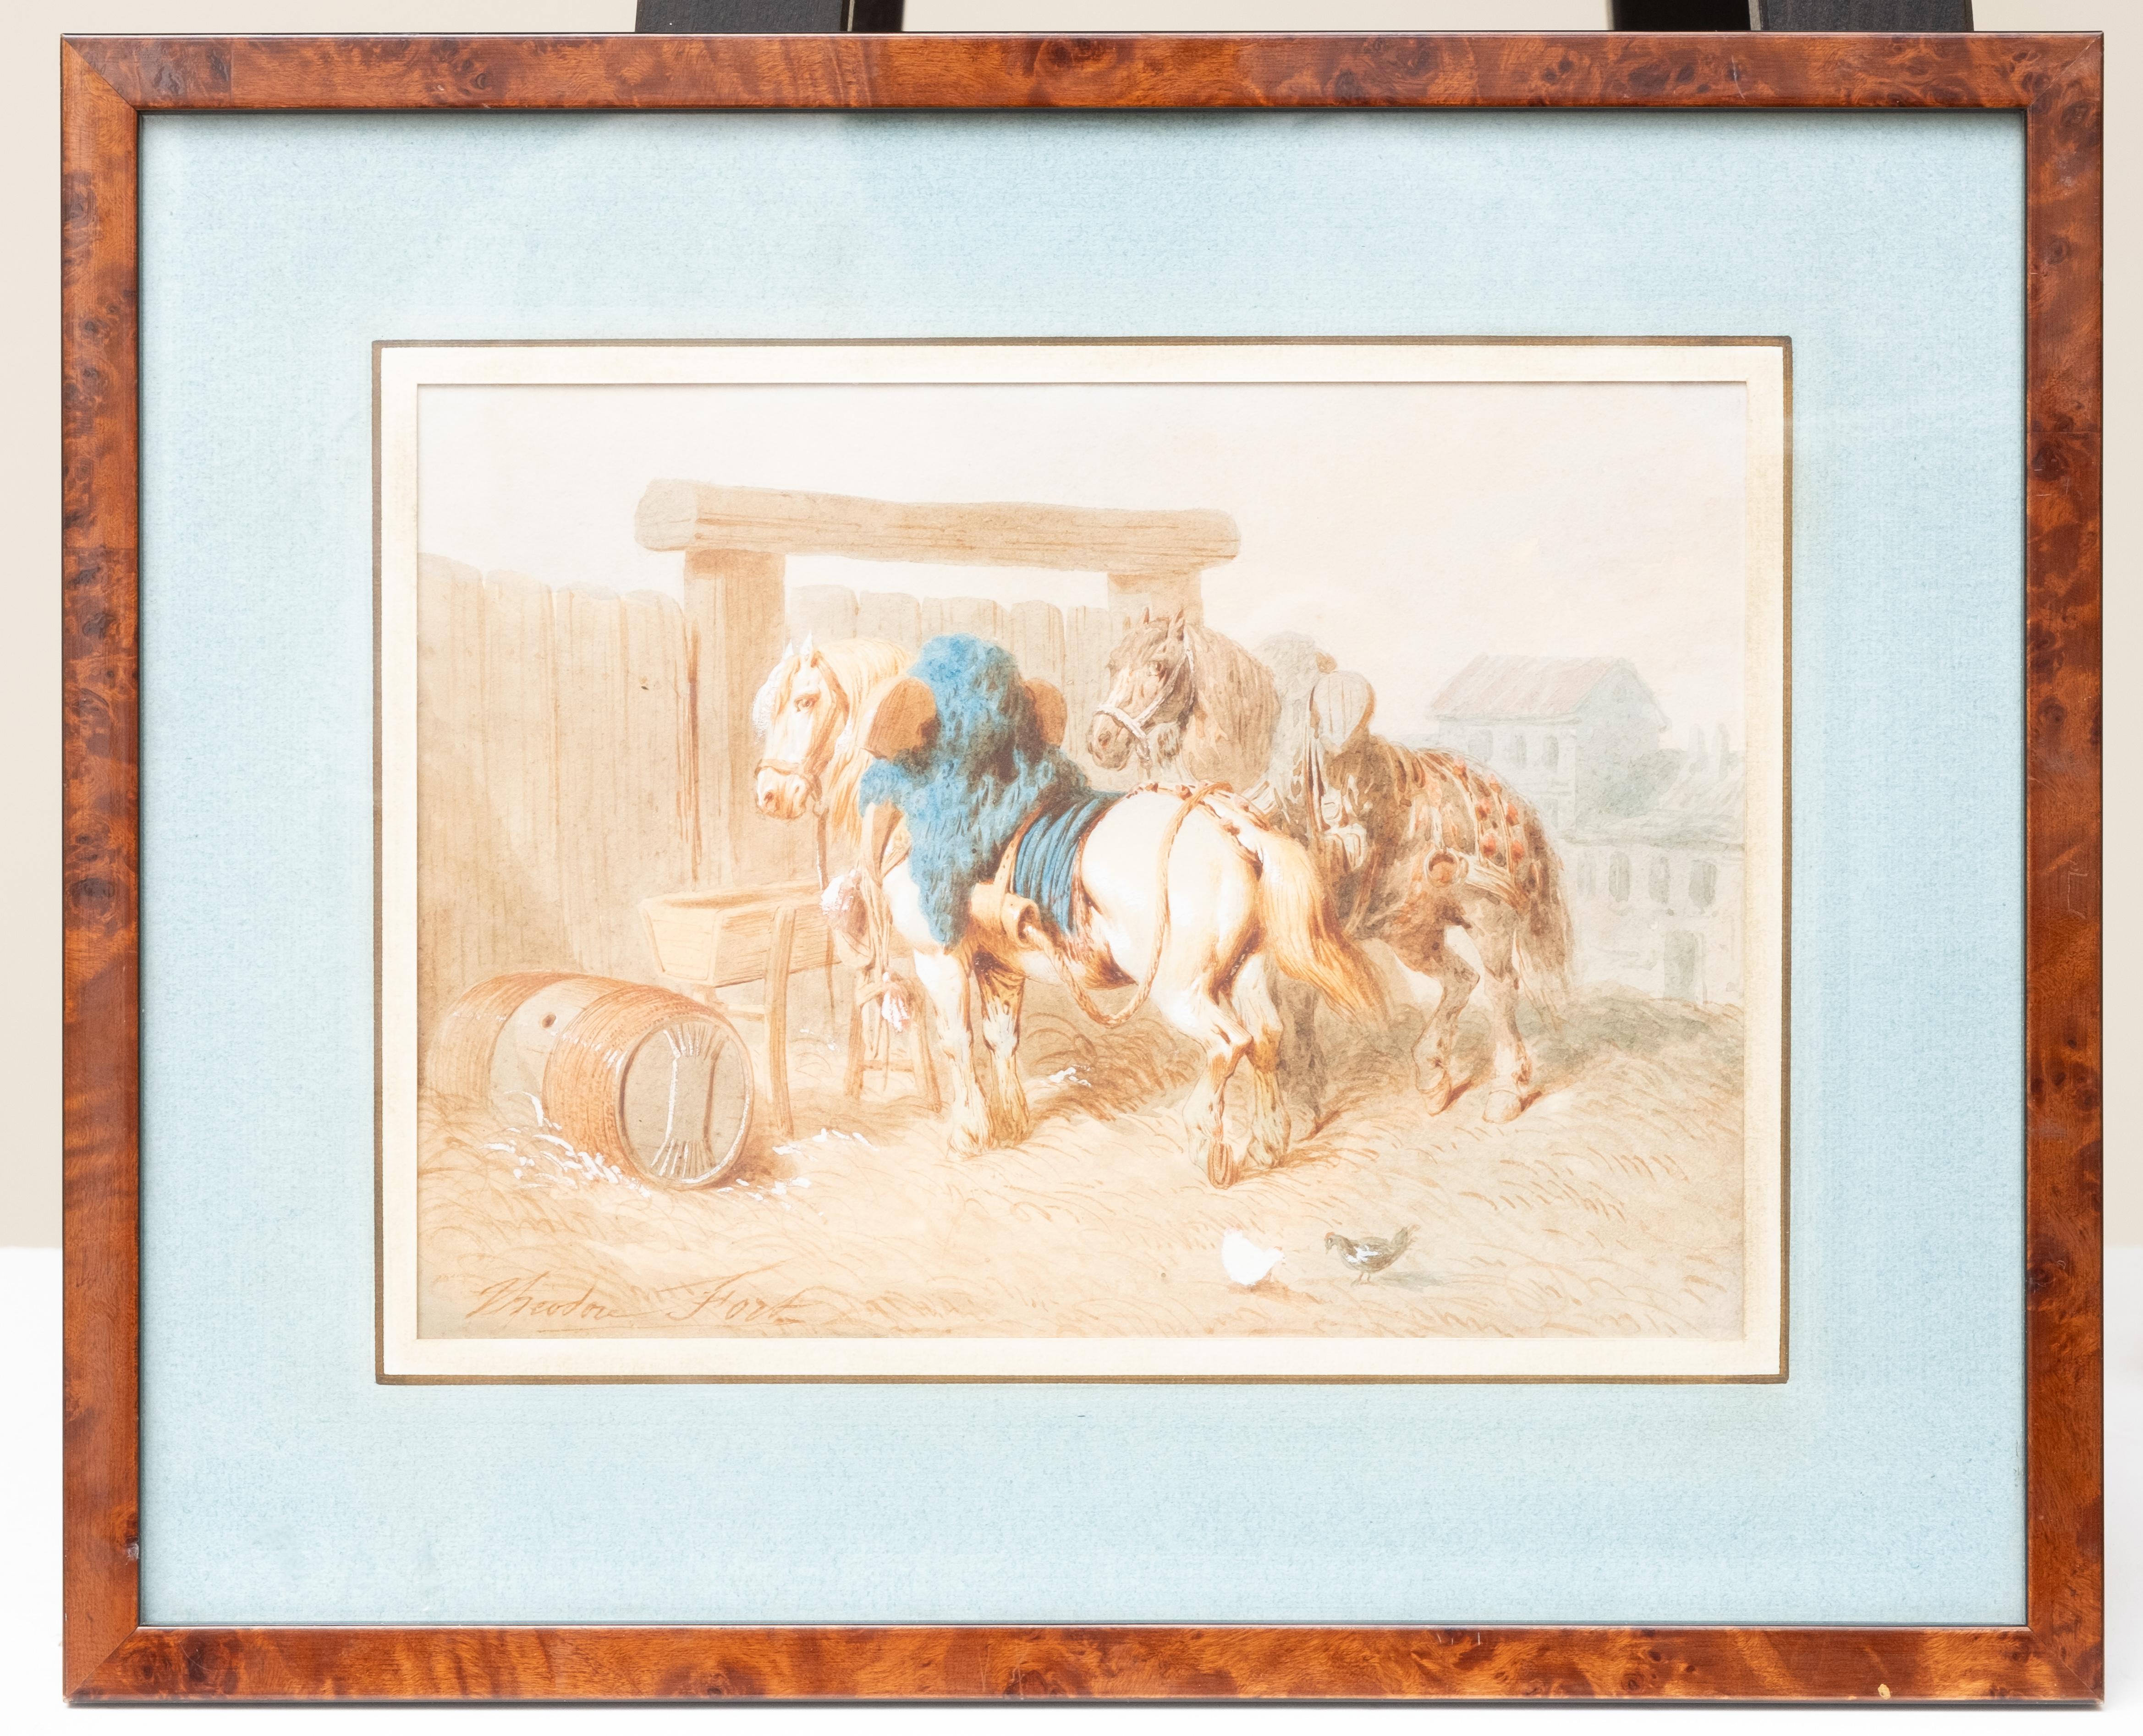 Theodore Gericault Fort (1810-1896) Horses at watering hole, Watercolor, signed lower left. Théodore Géricault Fort exhibited at the Salon from 1842. In his paintings he favors the representation of stables and horses.